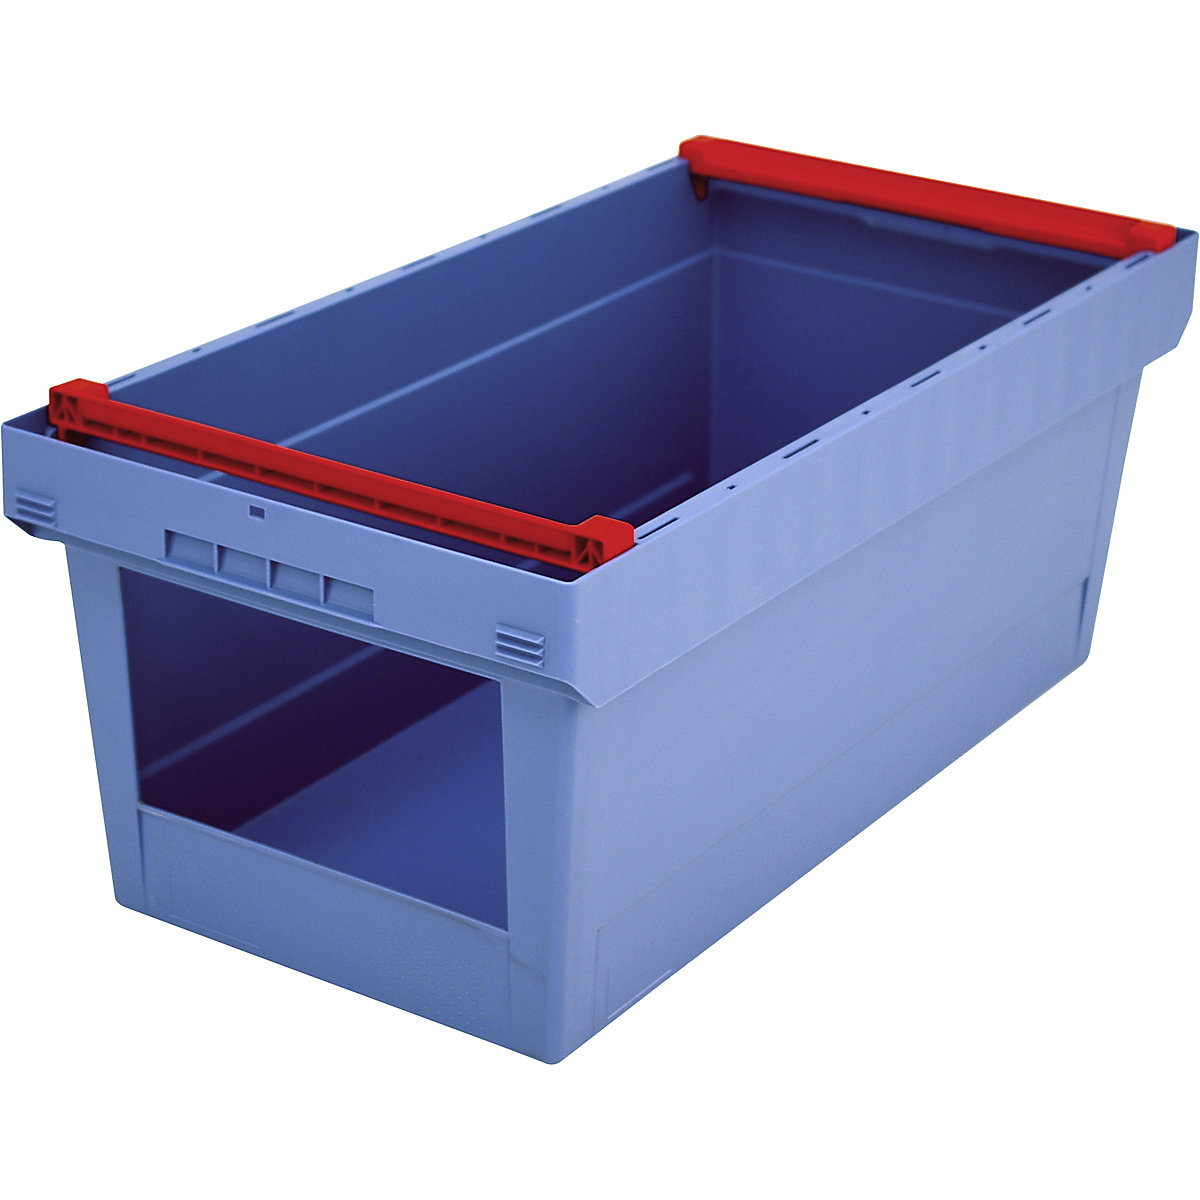 MB reusable container - BITO